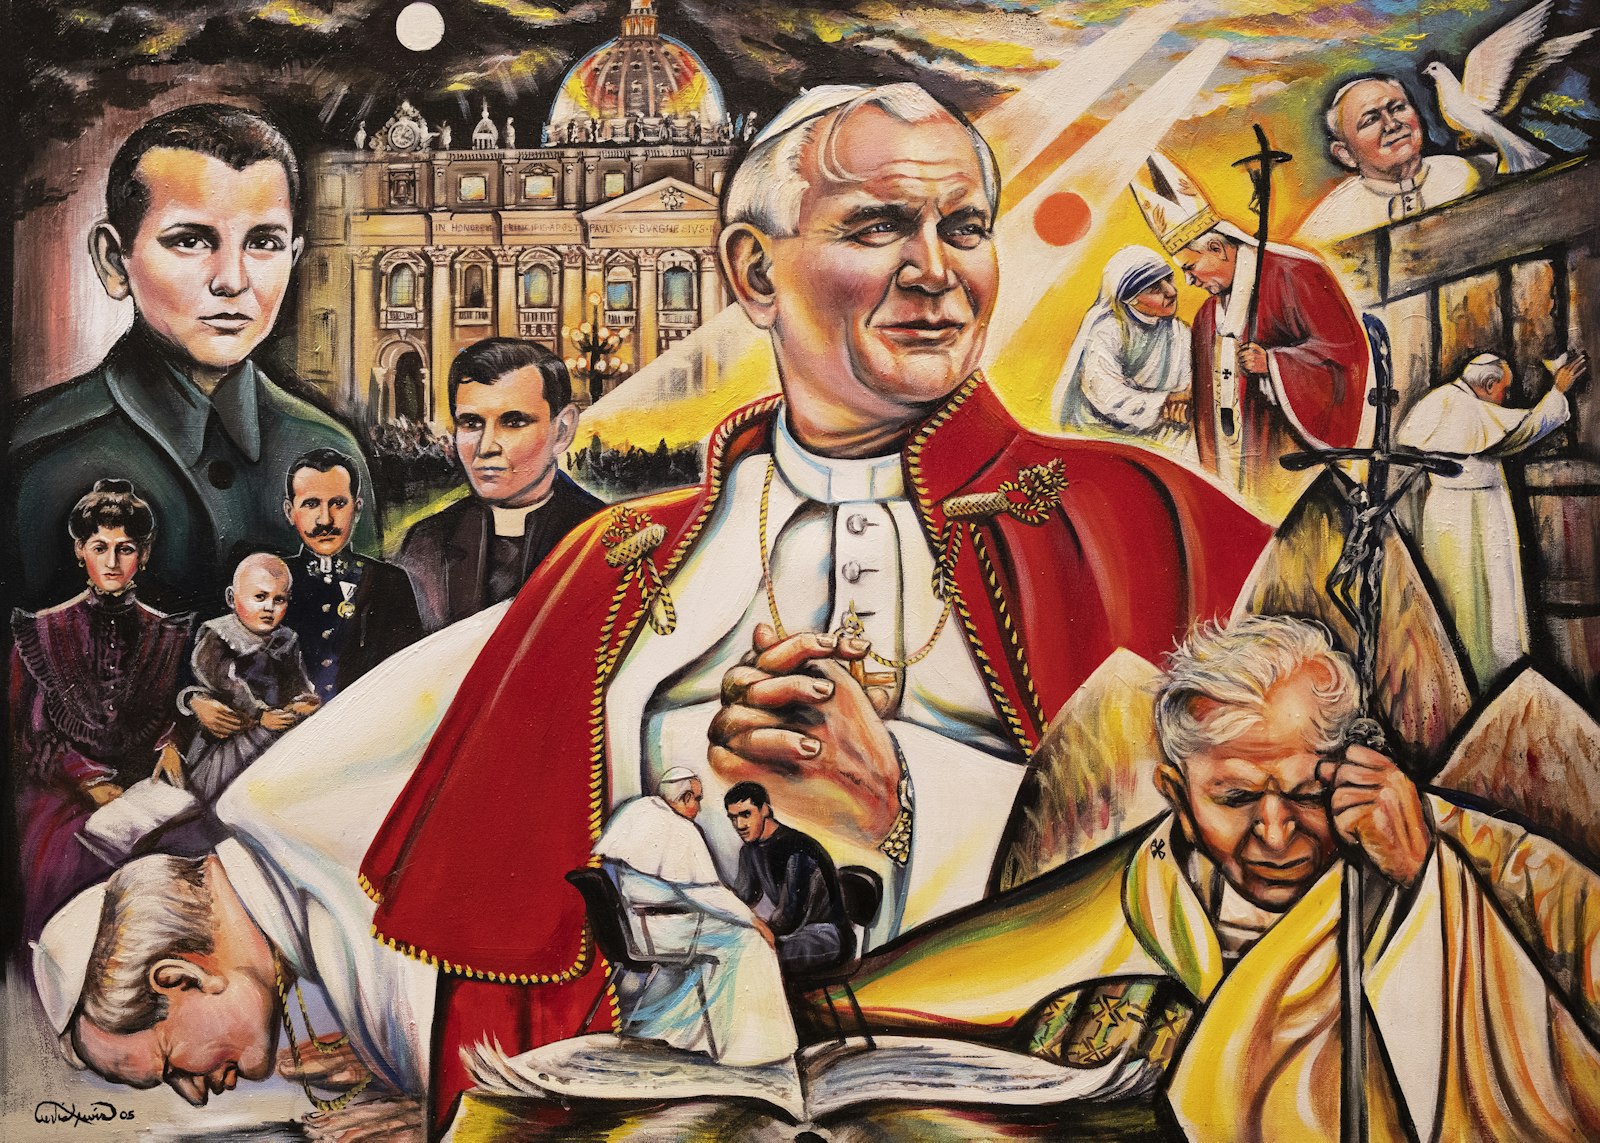 Lewis's mural depicts St. John Paul II at different times in his life: when he was a young man; when he visited the wailing wall in Jerusalem; praying with the man who tried to assassinate him in prison, and other scenes. The coloring book further distilled the story of the saint.